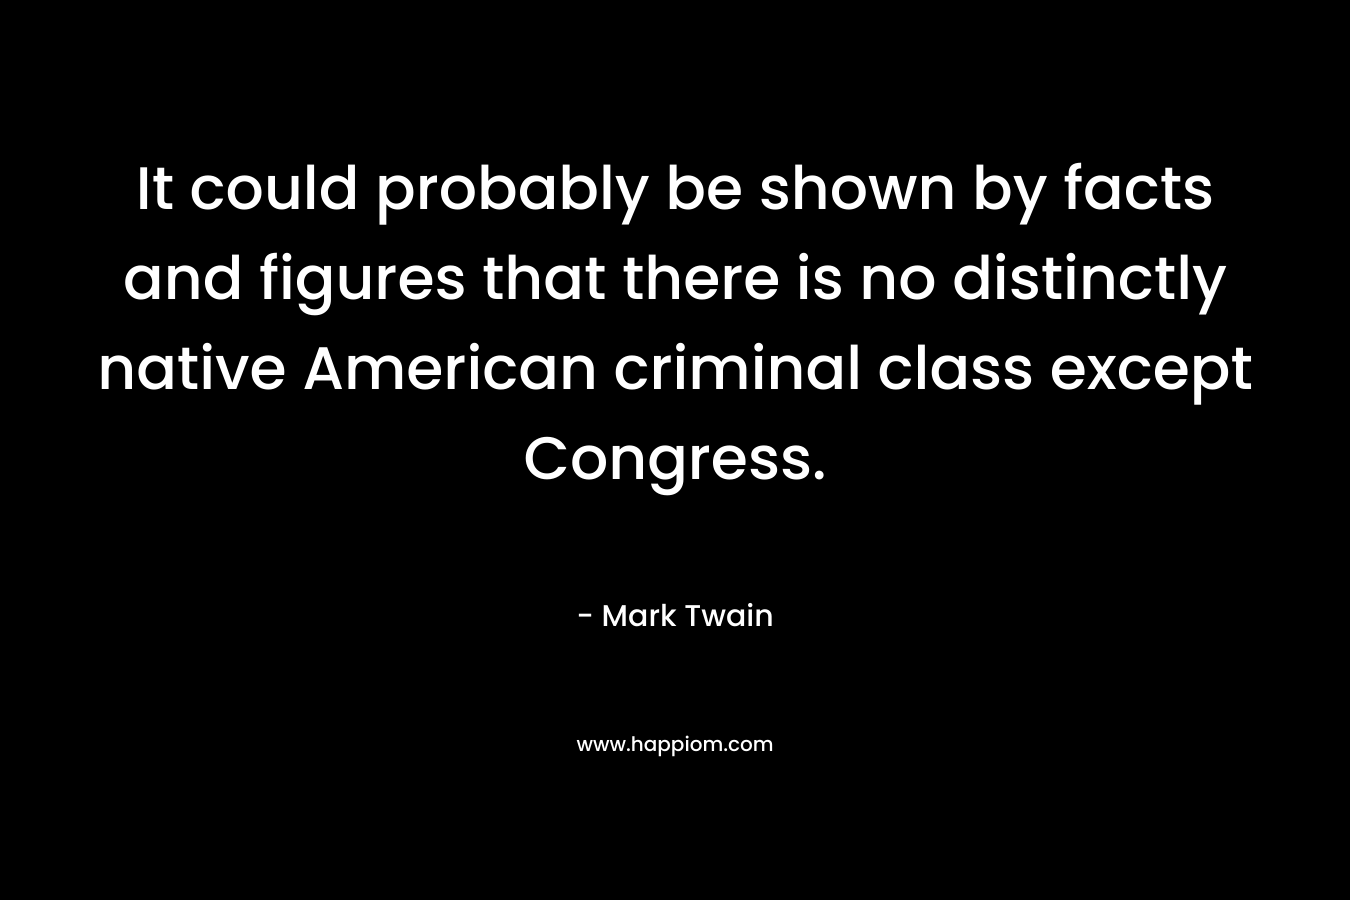 It could probably be shown by facts and figures that there is no distinctly native American criminal class except Congress. – Mark Twain